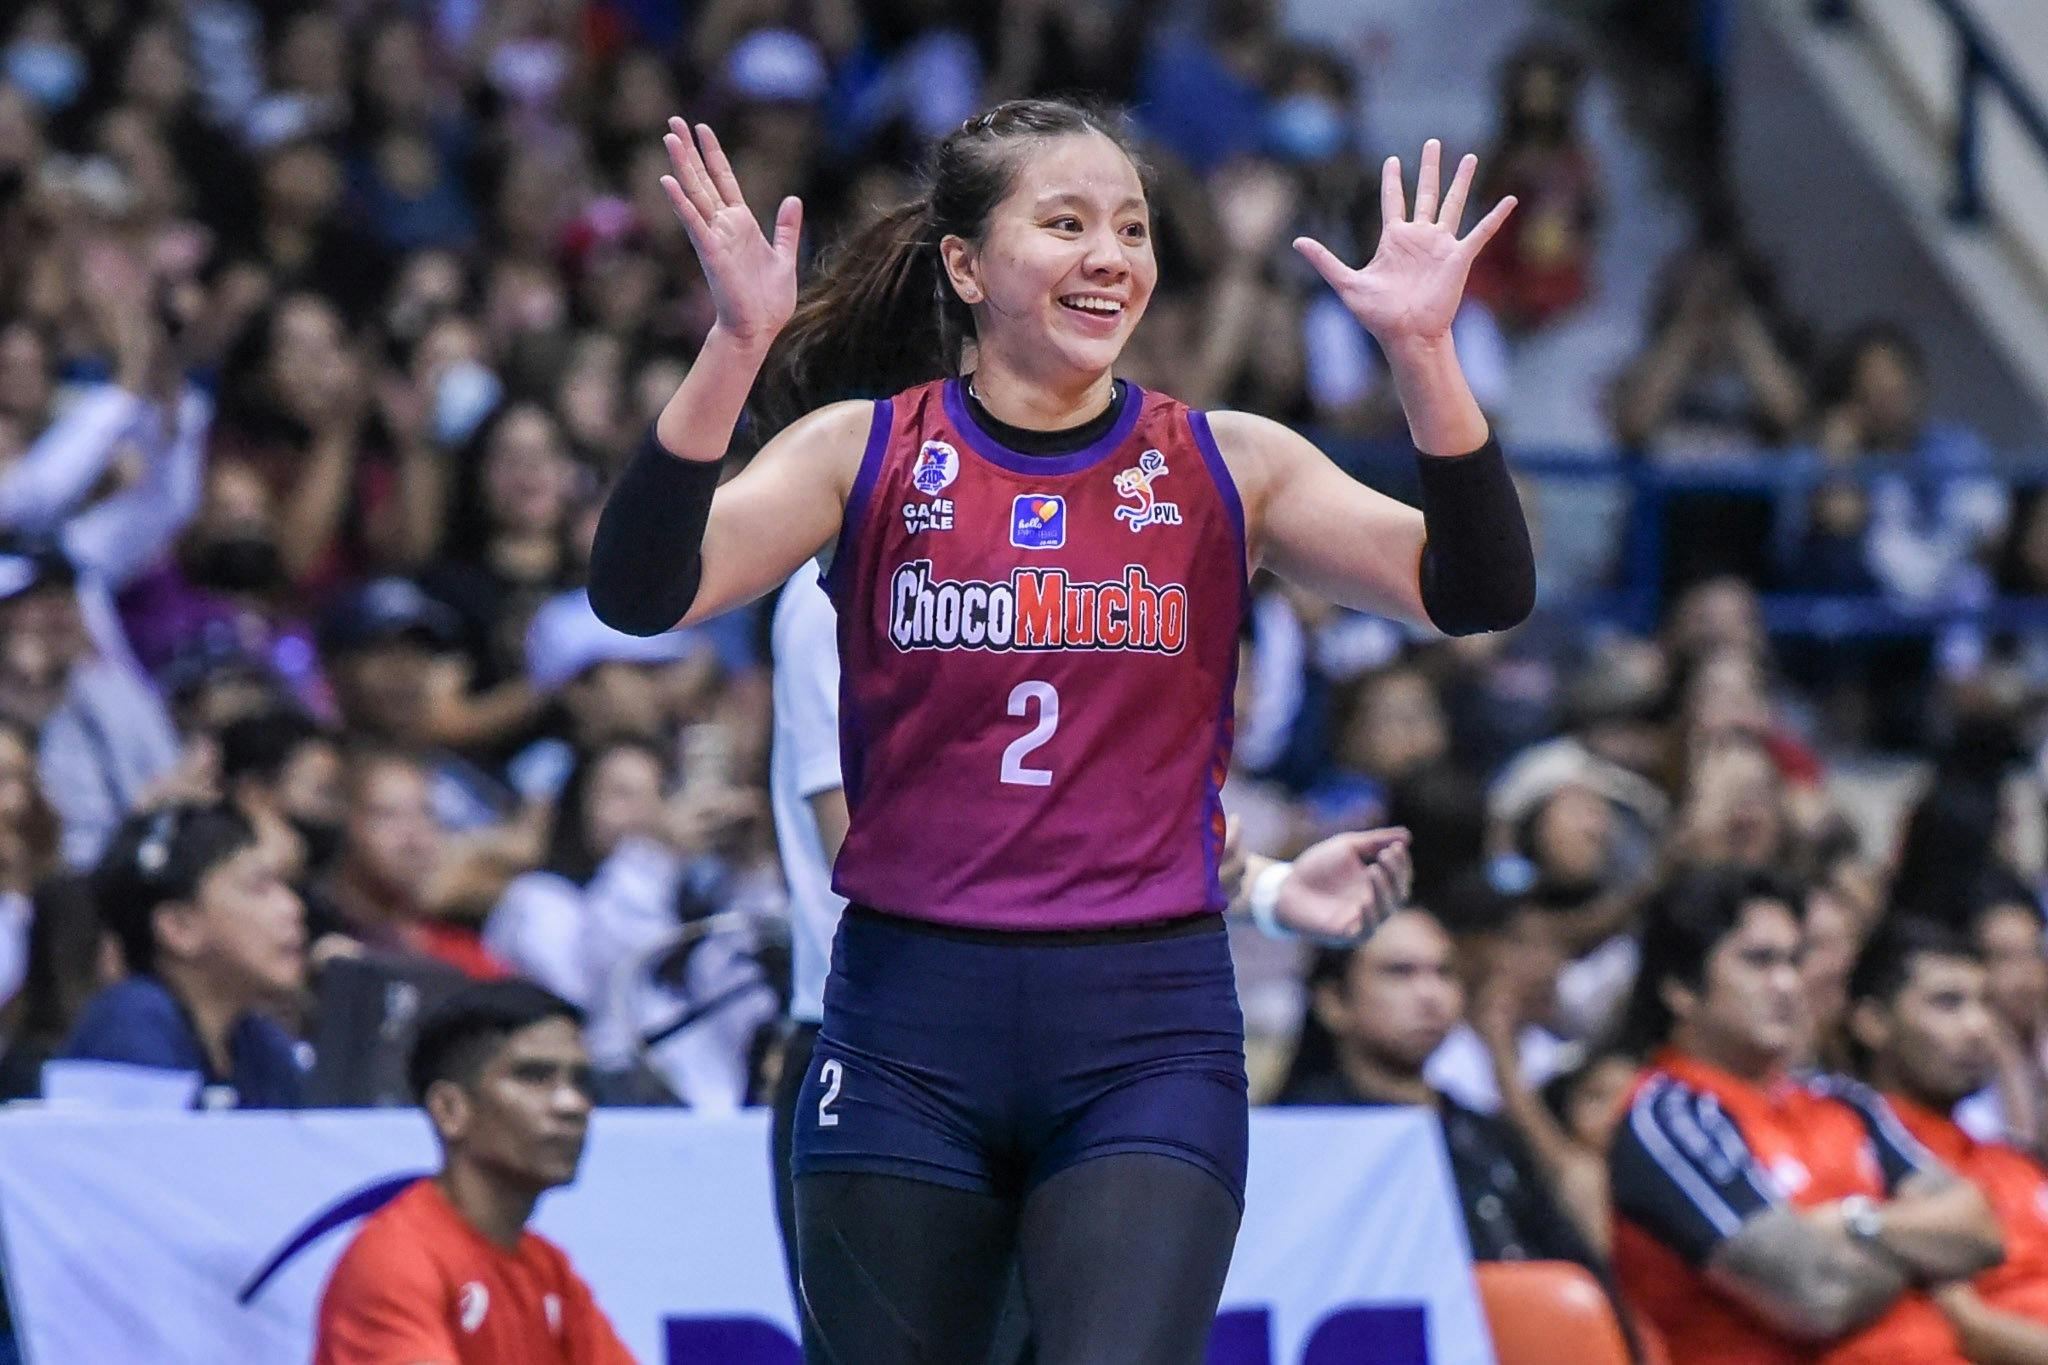 Choco Mucho star Des Cheng shares her happy place as she recovers from ACL injury